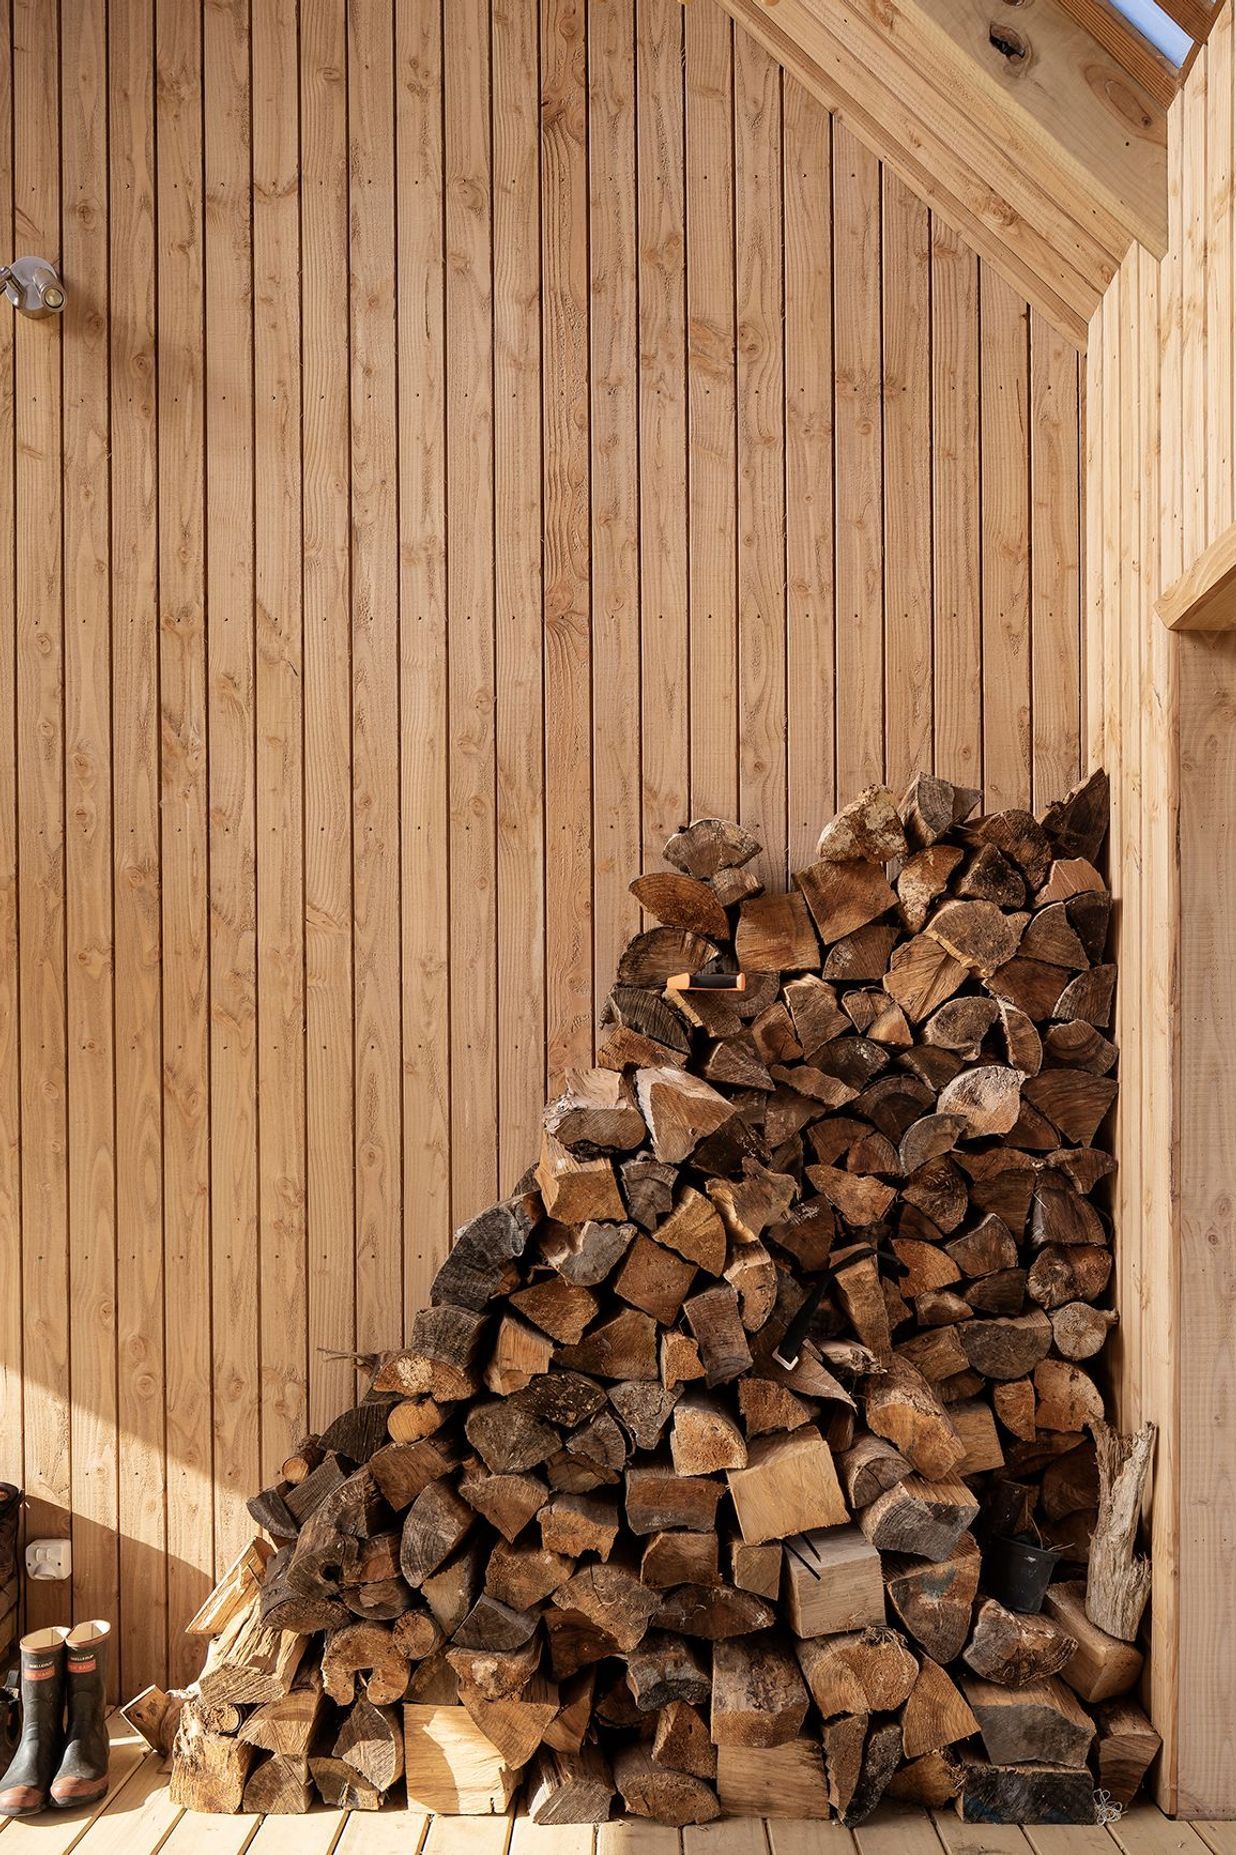 The firewood stack is kept dry and handy to reach.